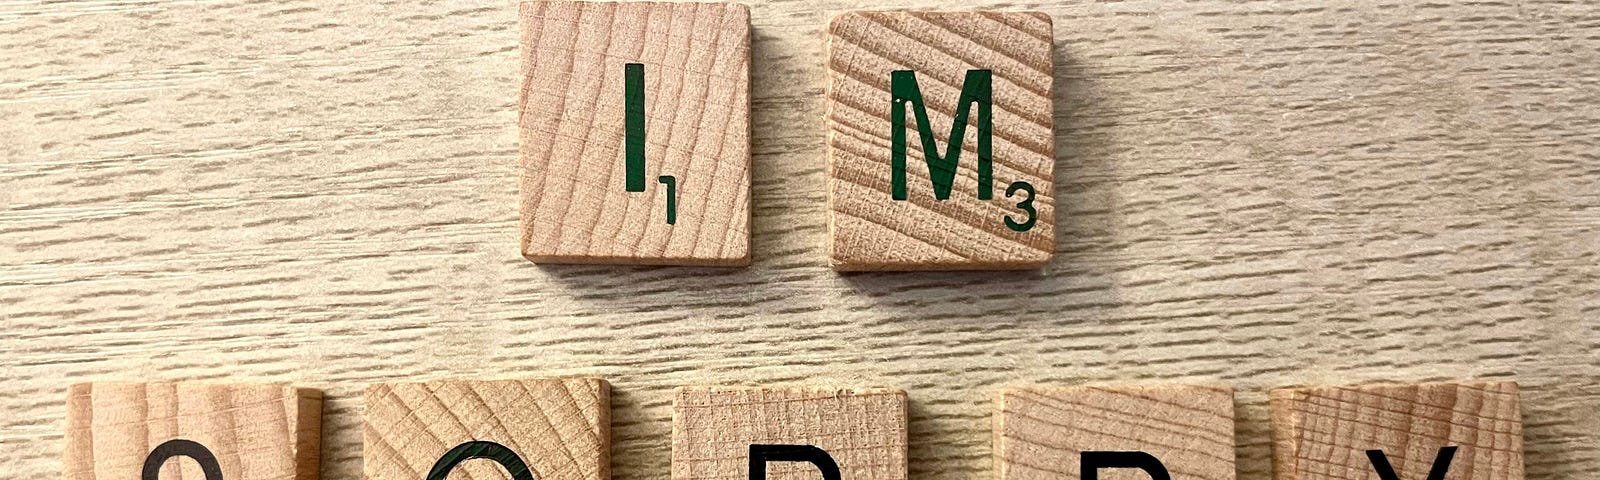 Scrabble tiles used to write the words: I’m sorry